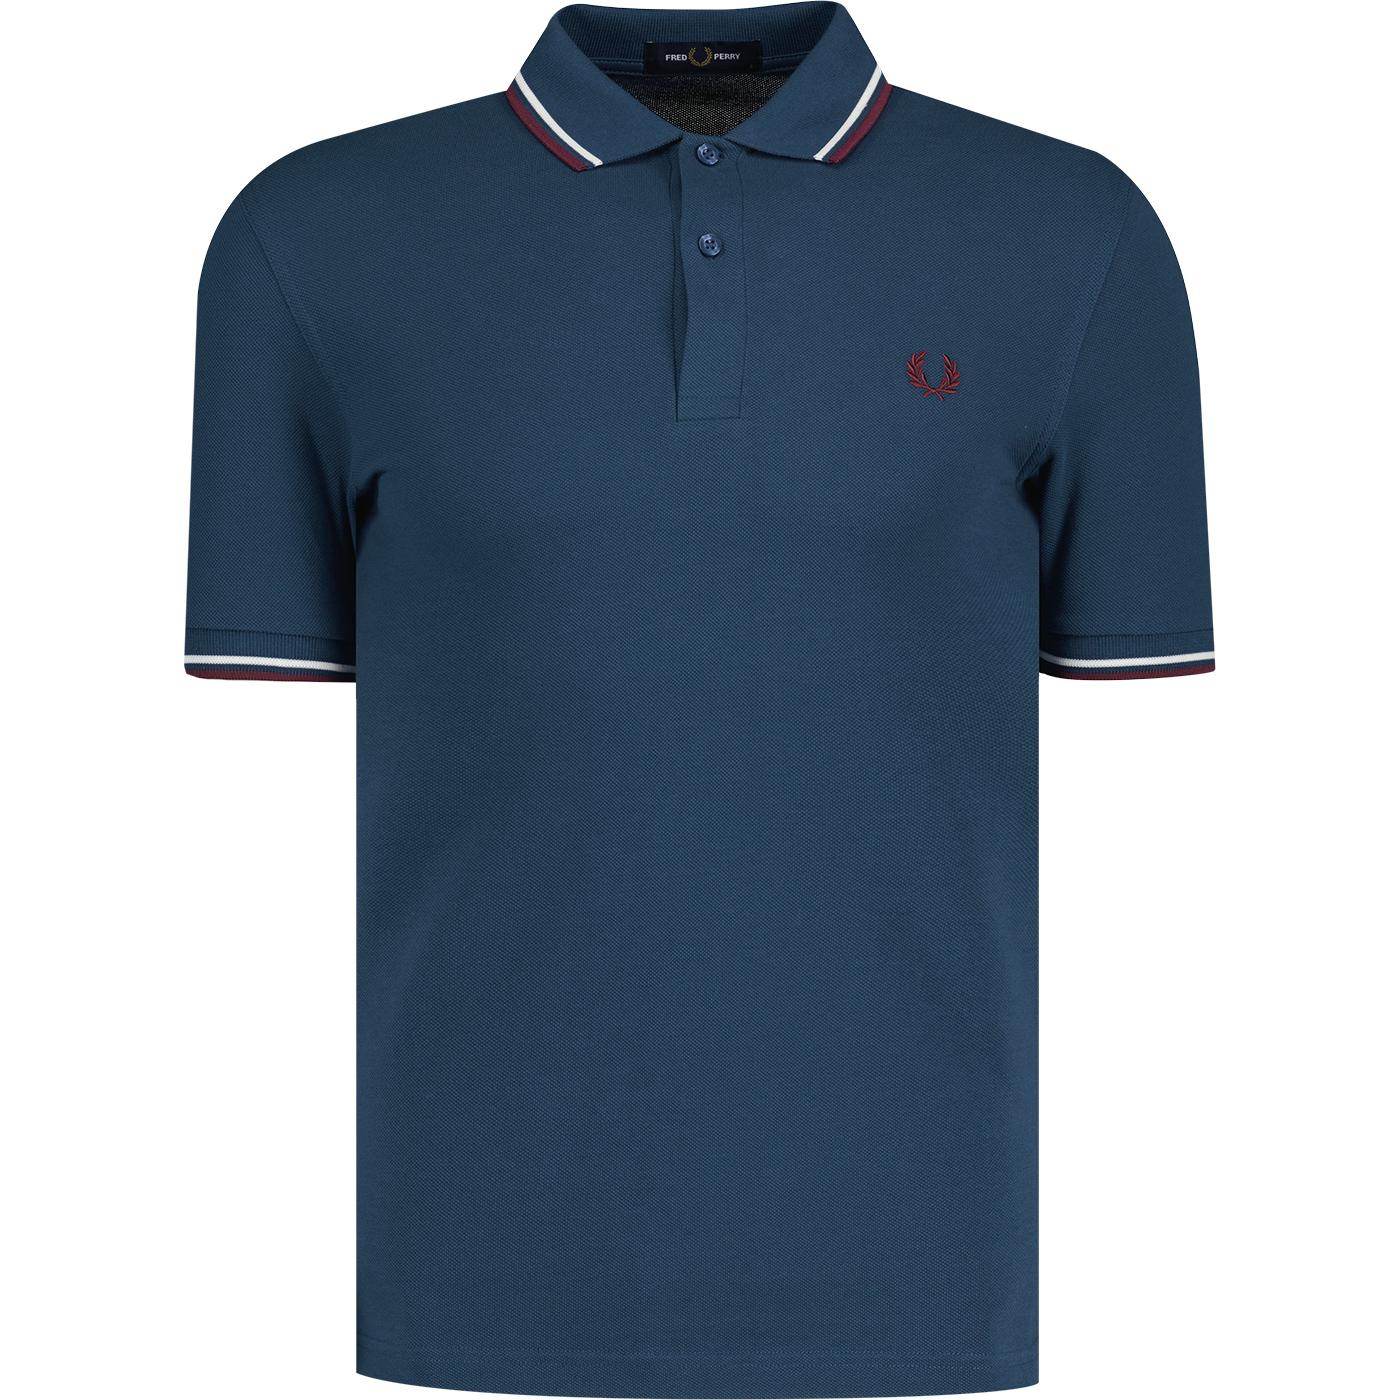 FRED PERRY M3600 Mod Twin Tipped Polo Shirt B/W